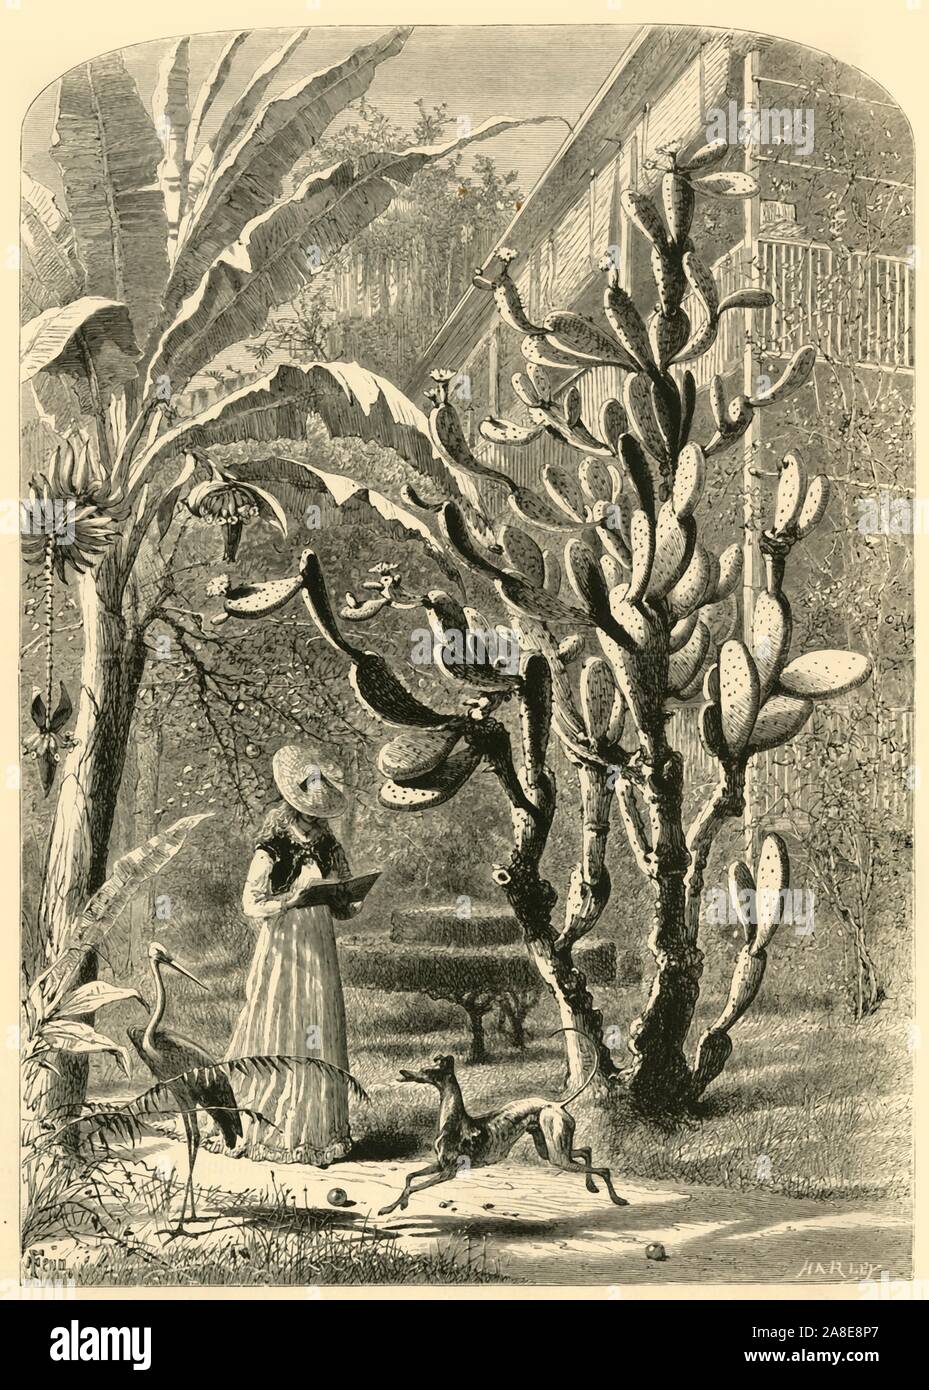 'A Garden in Florida', 1872. A woman in a bonnet reads in a tropical garden in Florida, USA. She is flanked by a banana tree and a large cactus, with a stork and a dog with a ball in the foreground. From &quot;Picturesque America; or, The Land We Live In, A Delineation by Pen and Pencil of the Mountains, Rivers, Lakes...with Illustrations on Steel and Wood by Eminent American Artists&quot; Vol. I, edited by William Cullen Bryant. [D. Appleton and Company, New York, 1872] Stock Photo